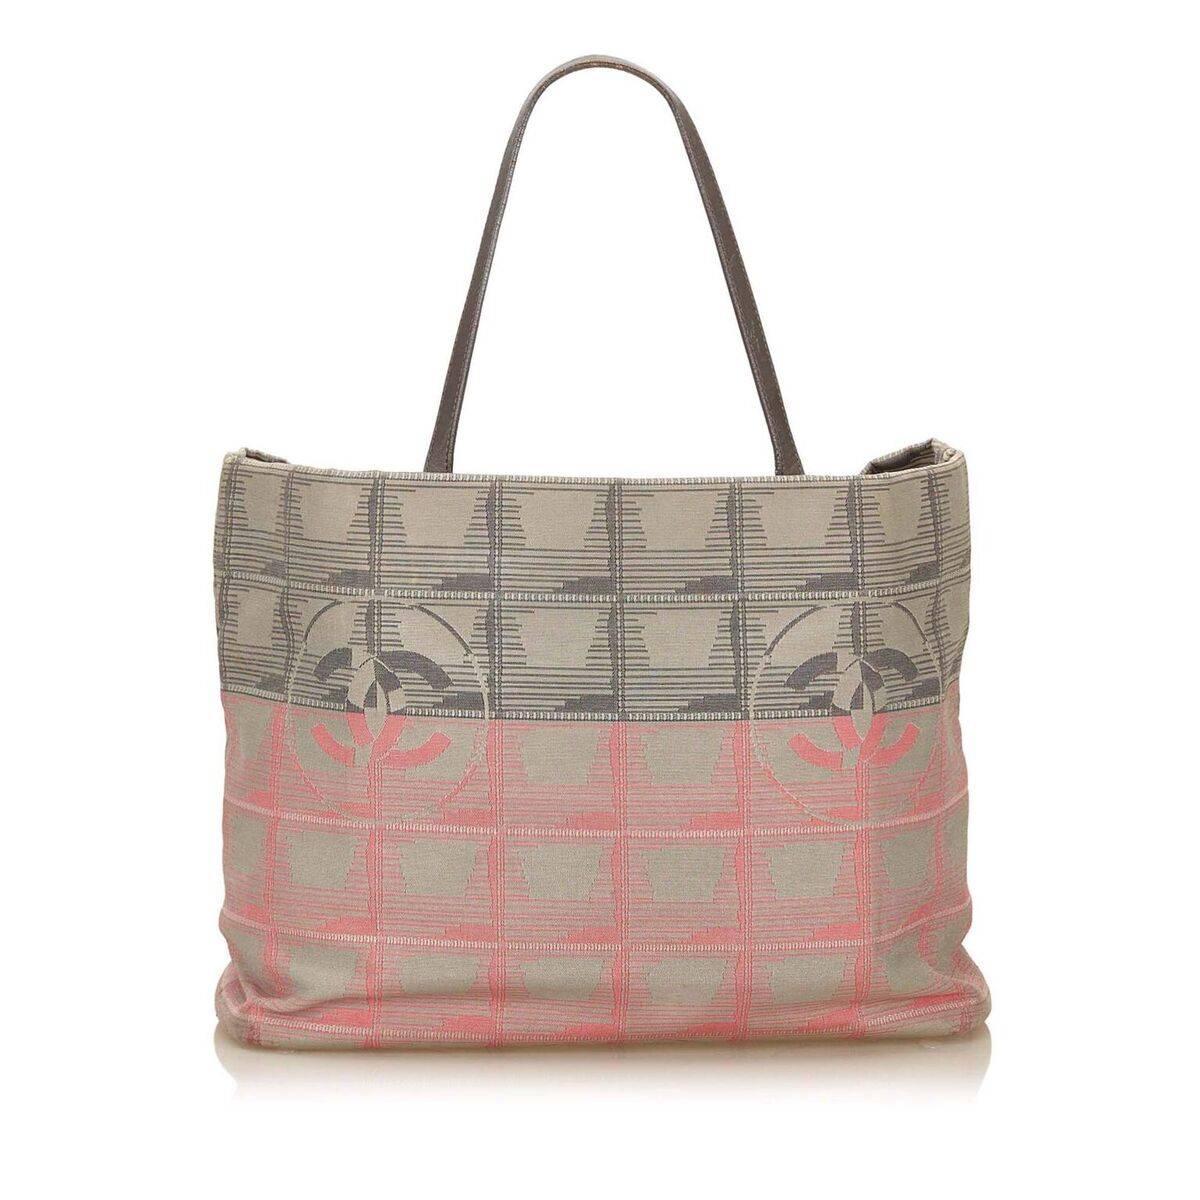 grey and pink purse